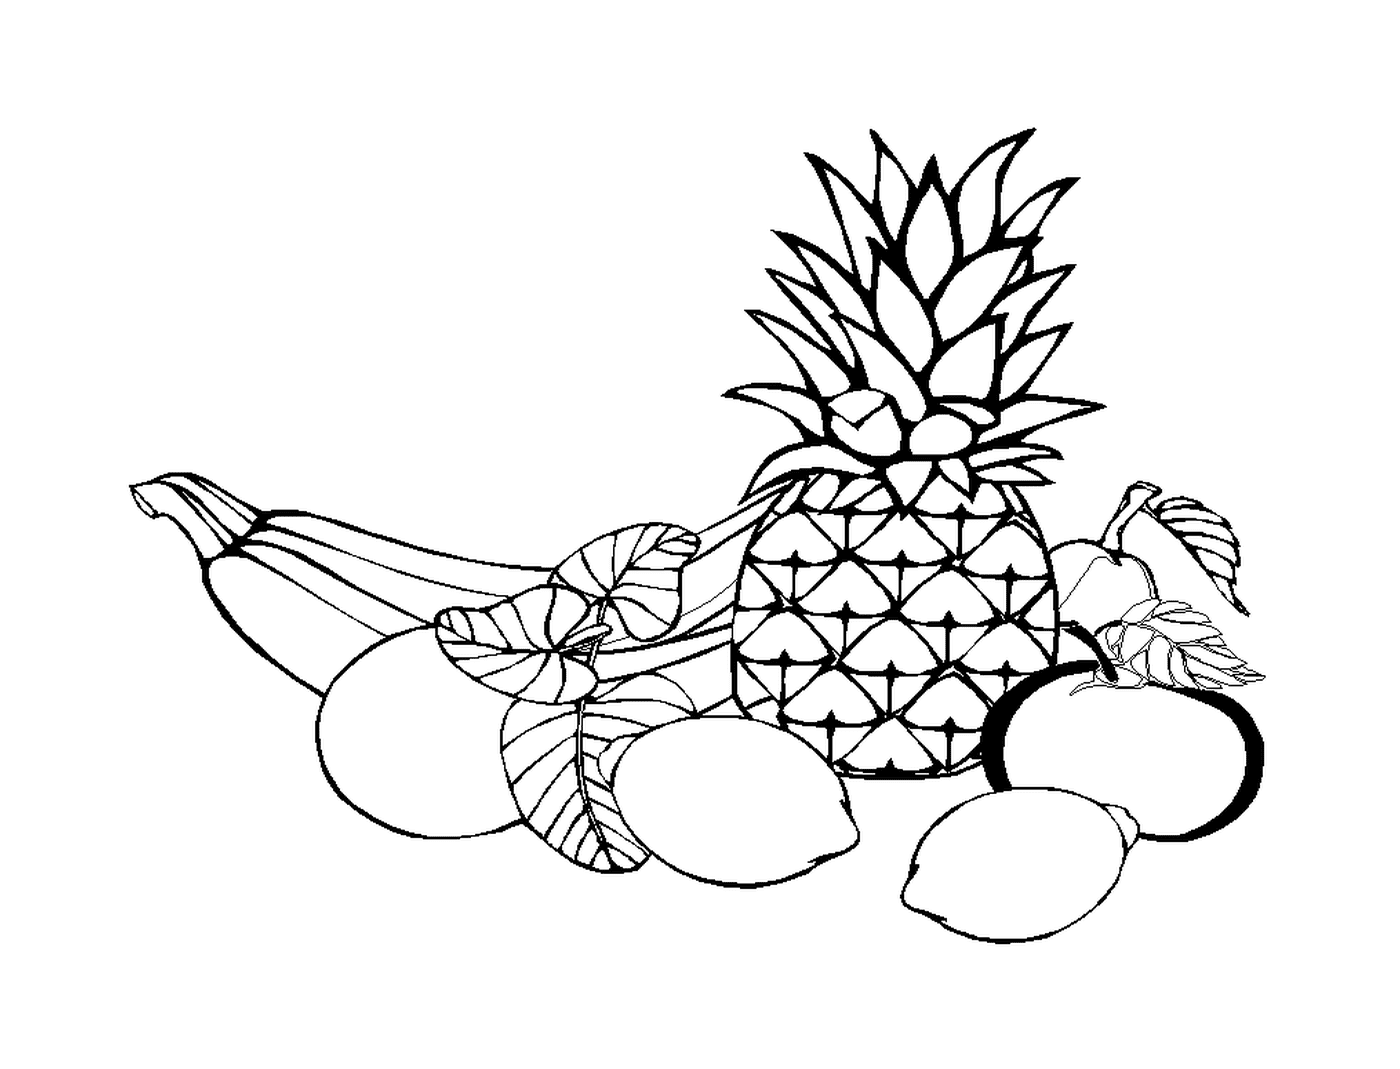  Pineapples and other fruit 